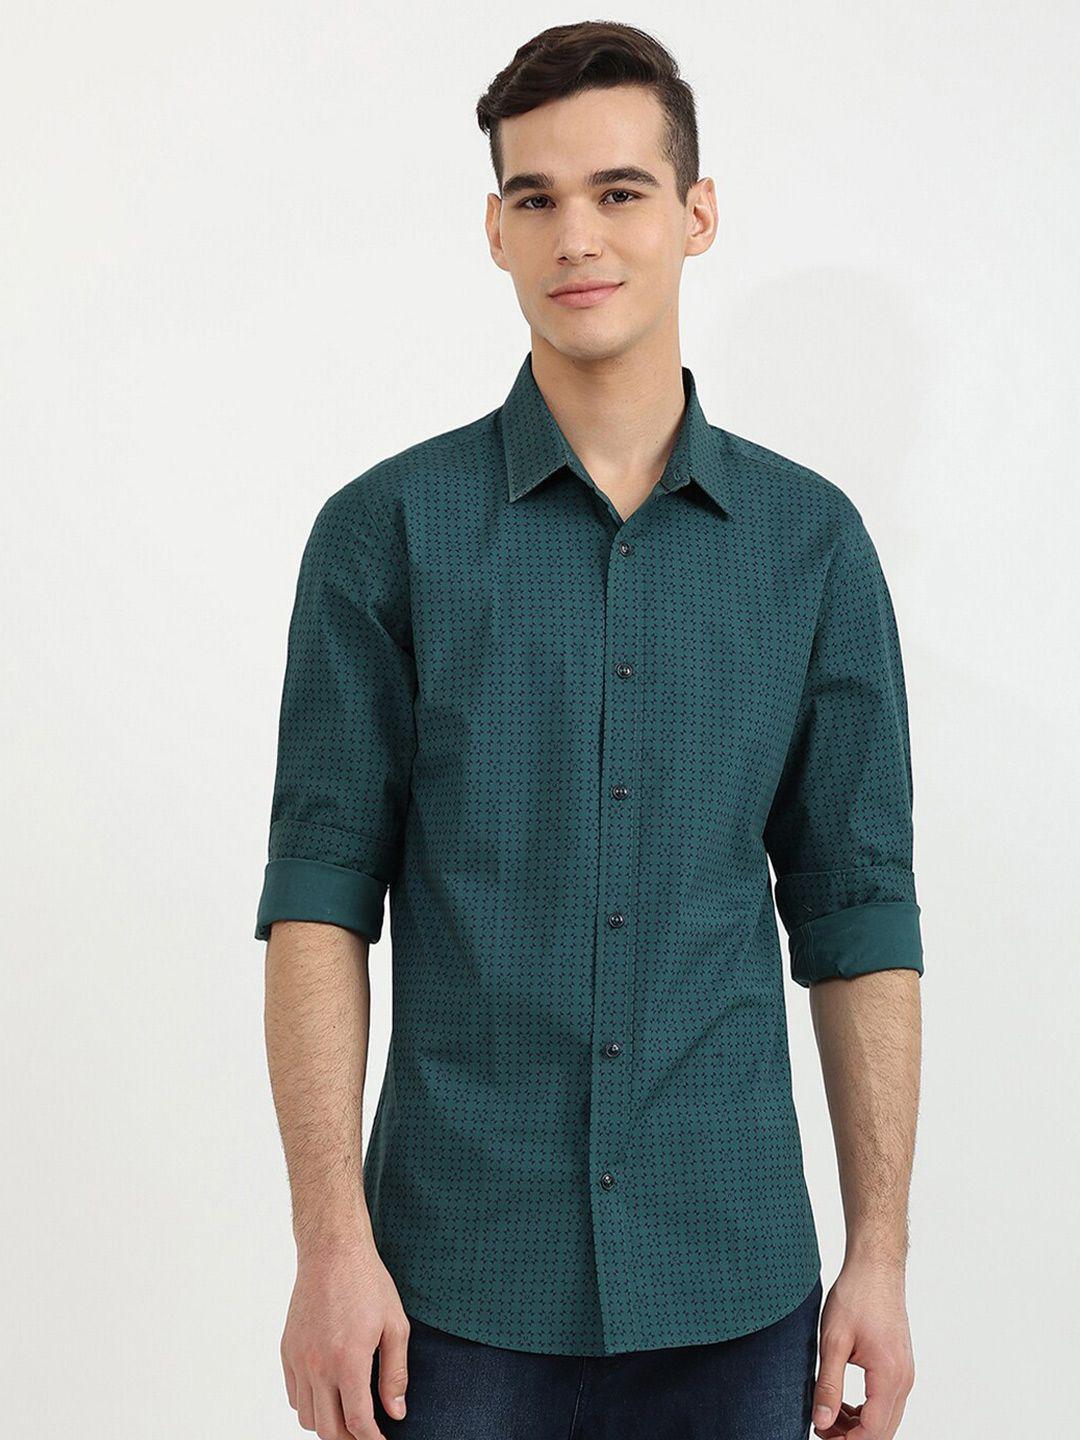 united-colors-of-benetton-men-green-slim-fit-printed-cotton-casual-shirt